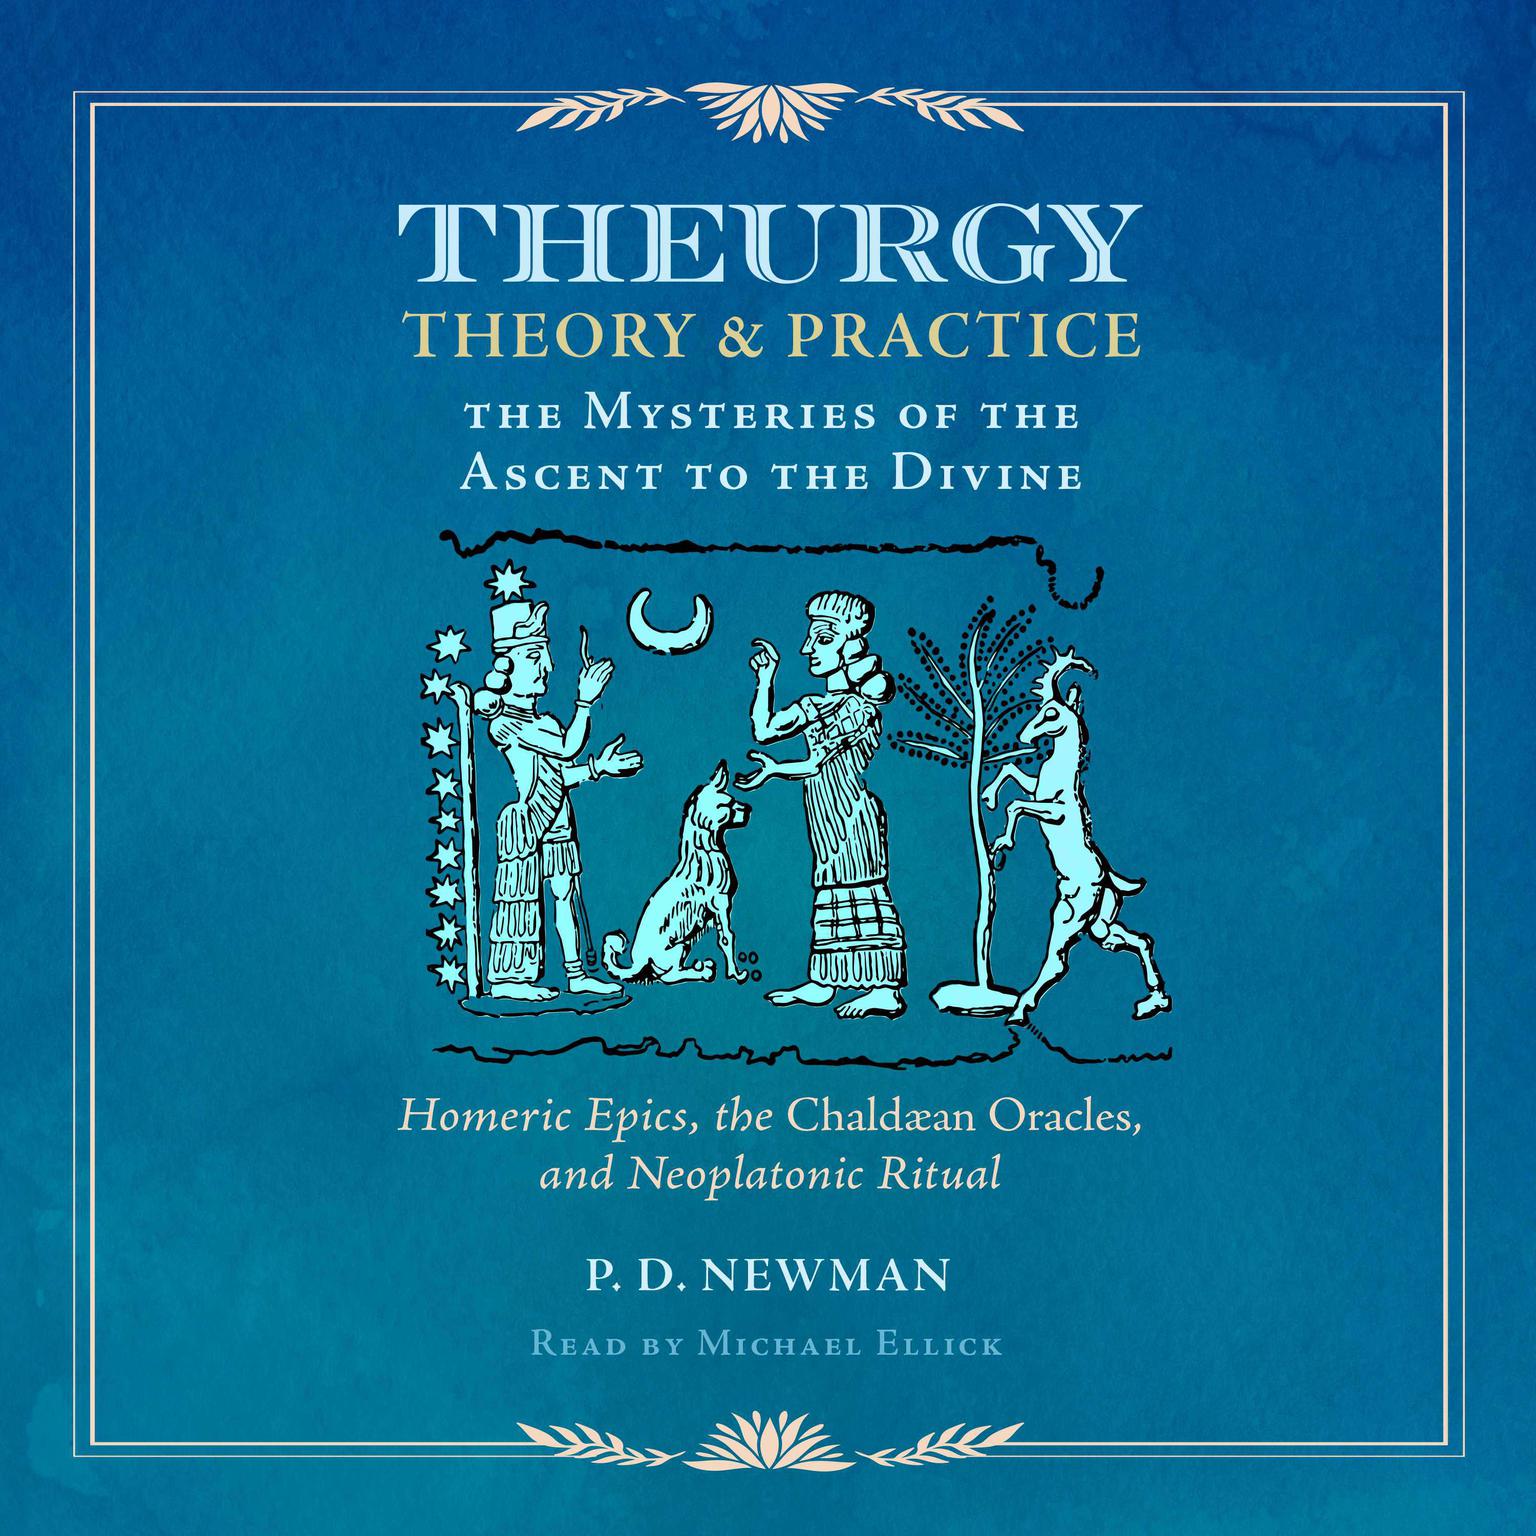 Theurgy: Theory and Practice: The Mysteries of the Ascent to the Divine Audiobook, by P. D. Newman